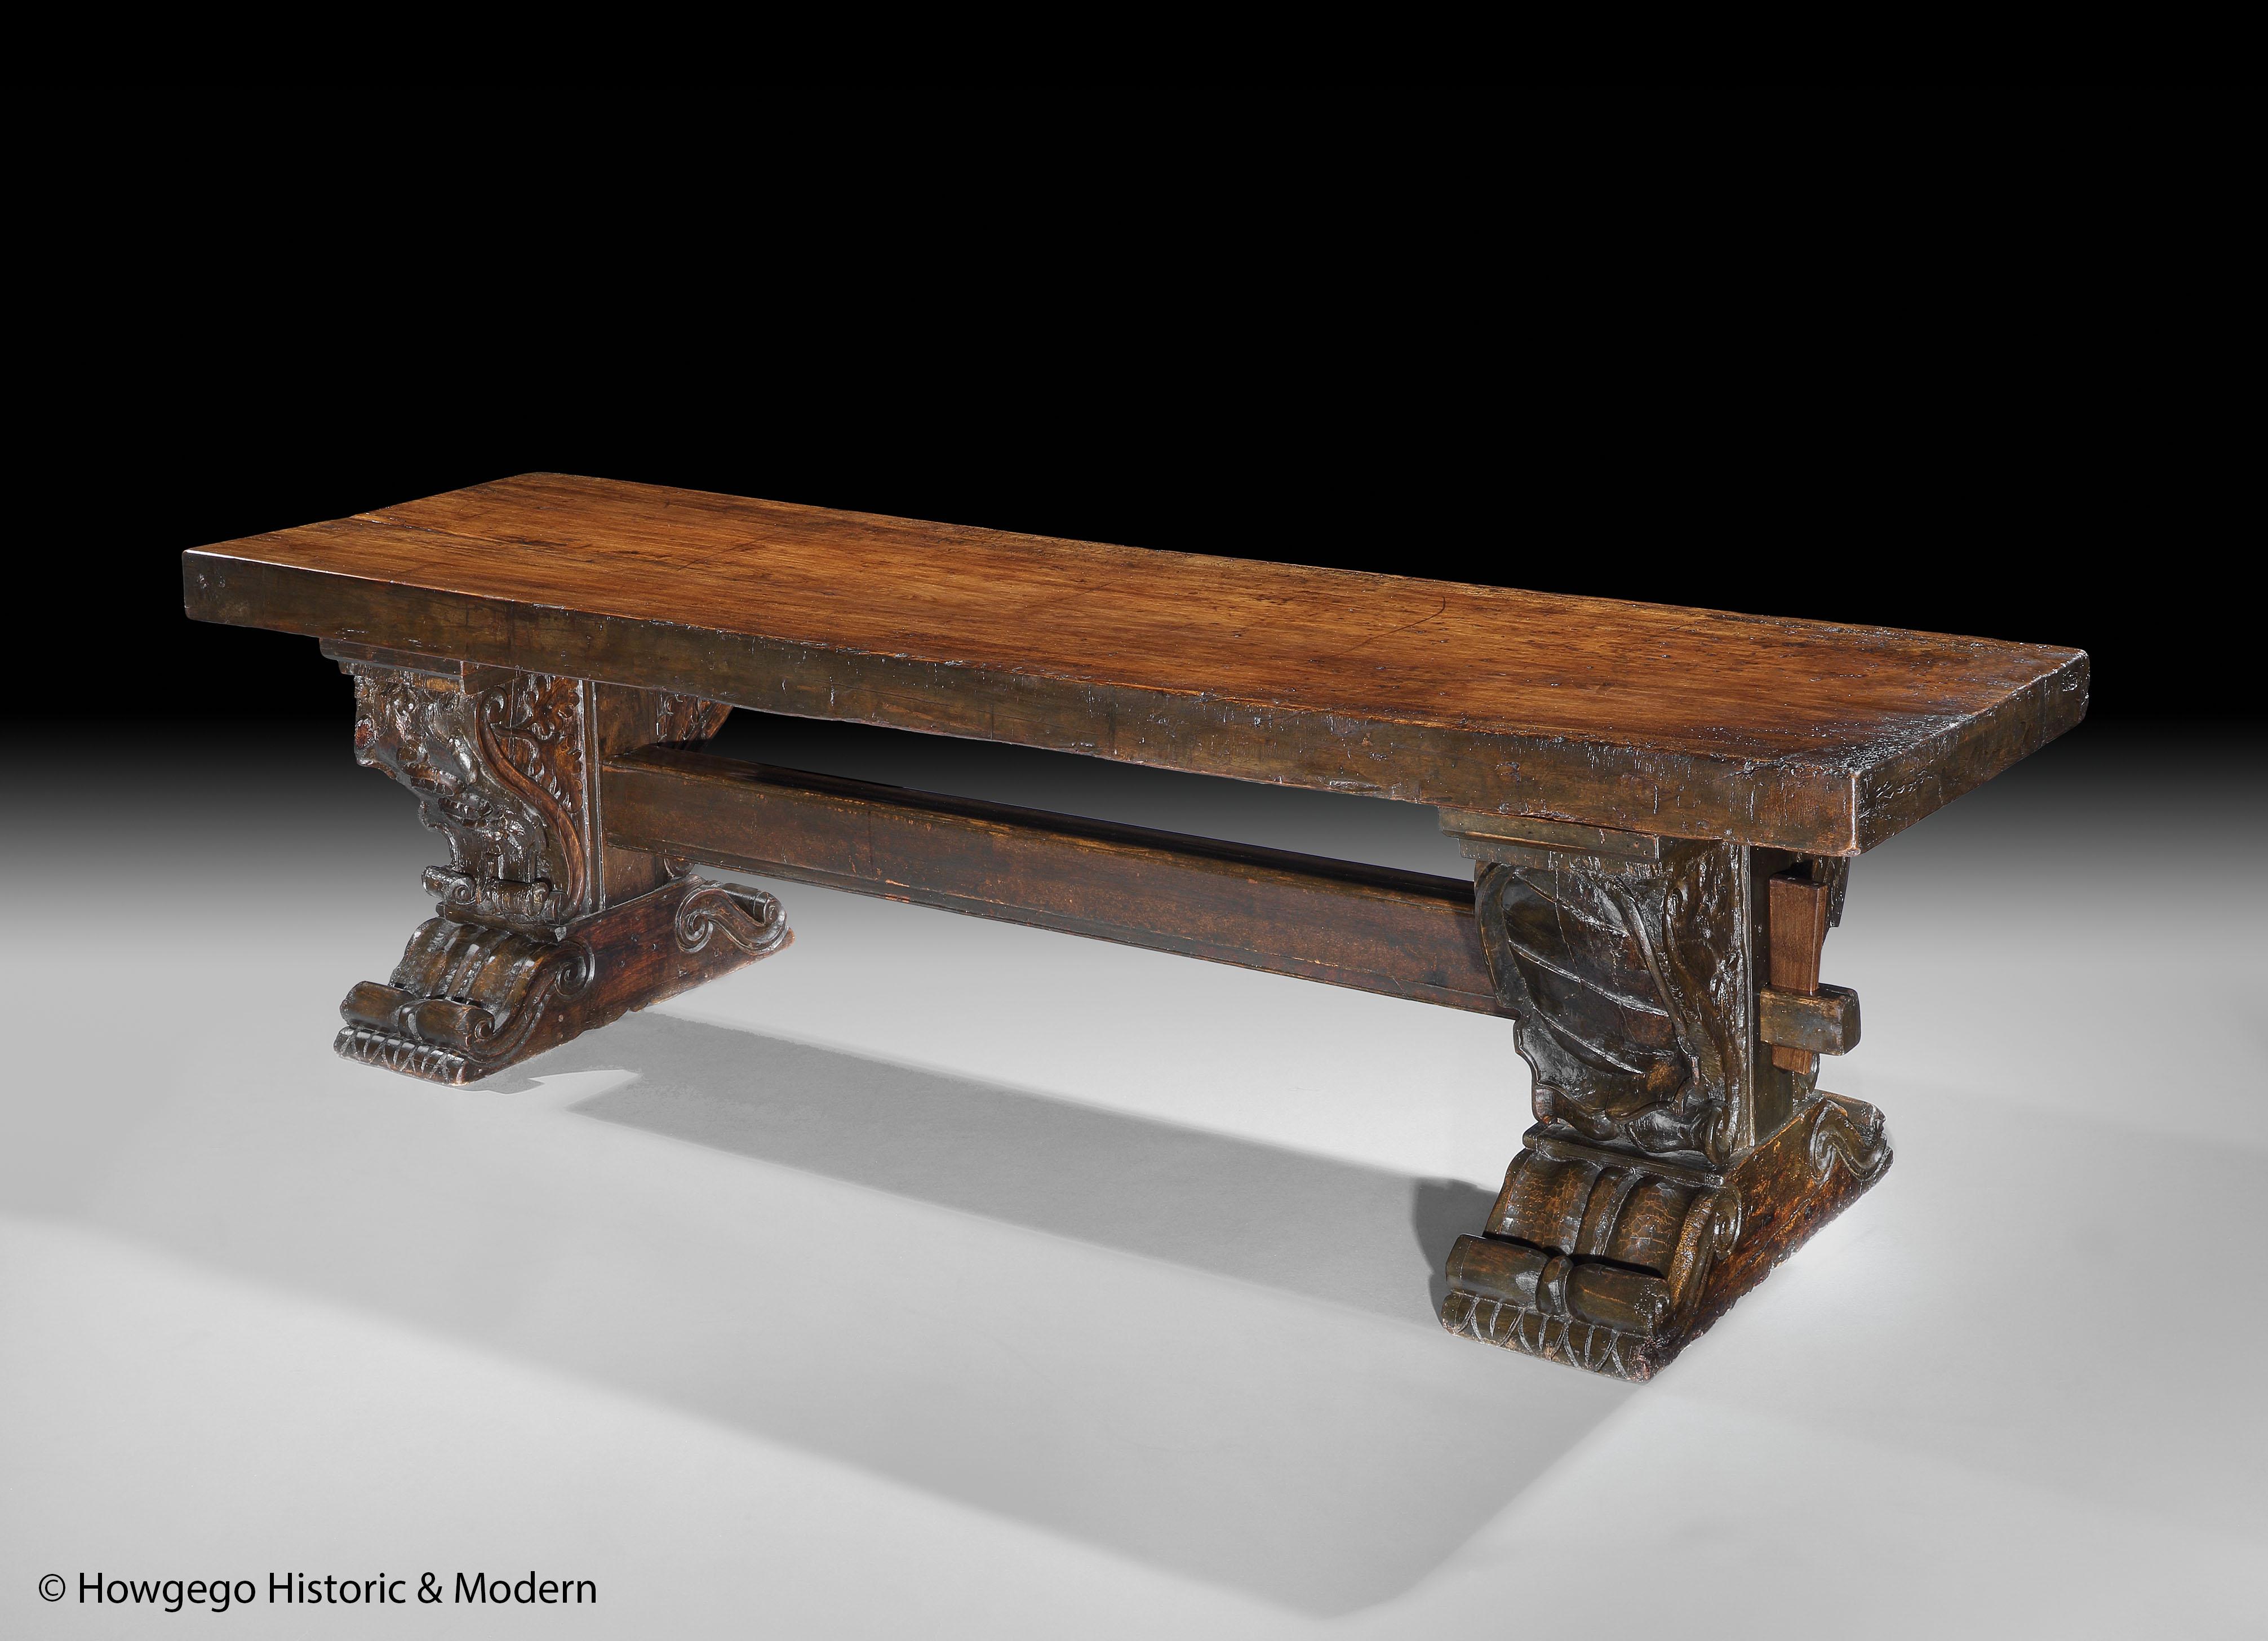 A massive, 14-16 seater, antiquarian, milanese, renaissance-revival, monastery, trestle table with 10ft long, 4 ¼” thick, single plank walnut top & oak trestles carved with an armorial, the heraldic charge of the dukes of milan & heraldic